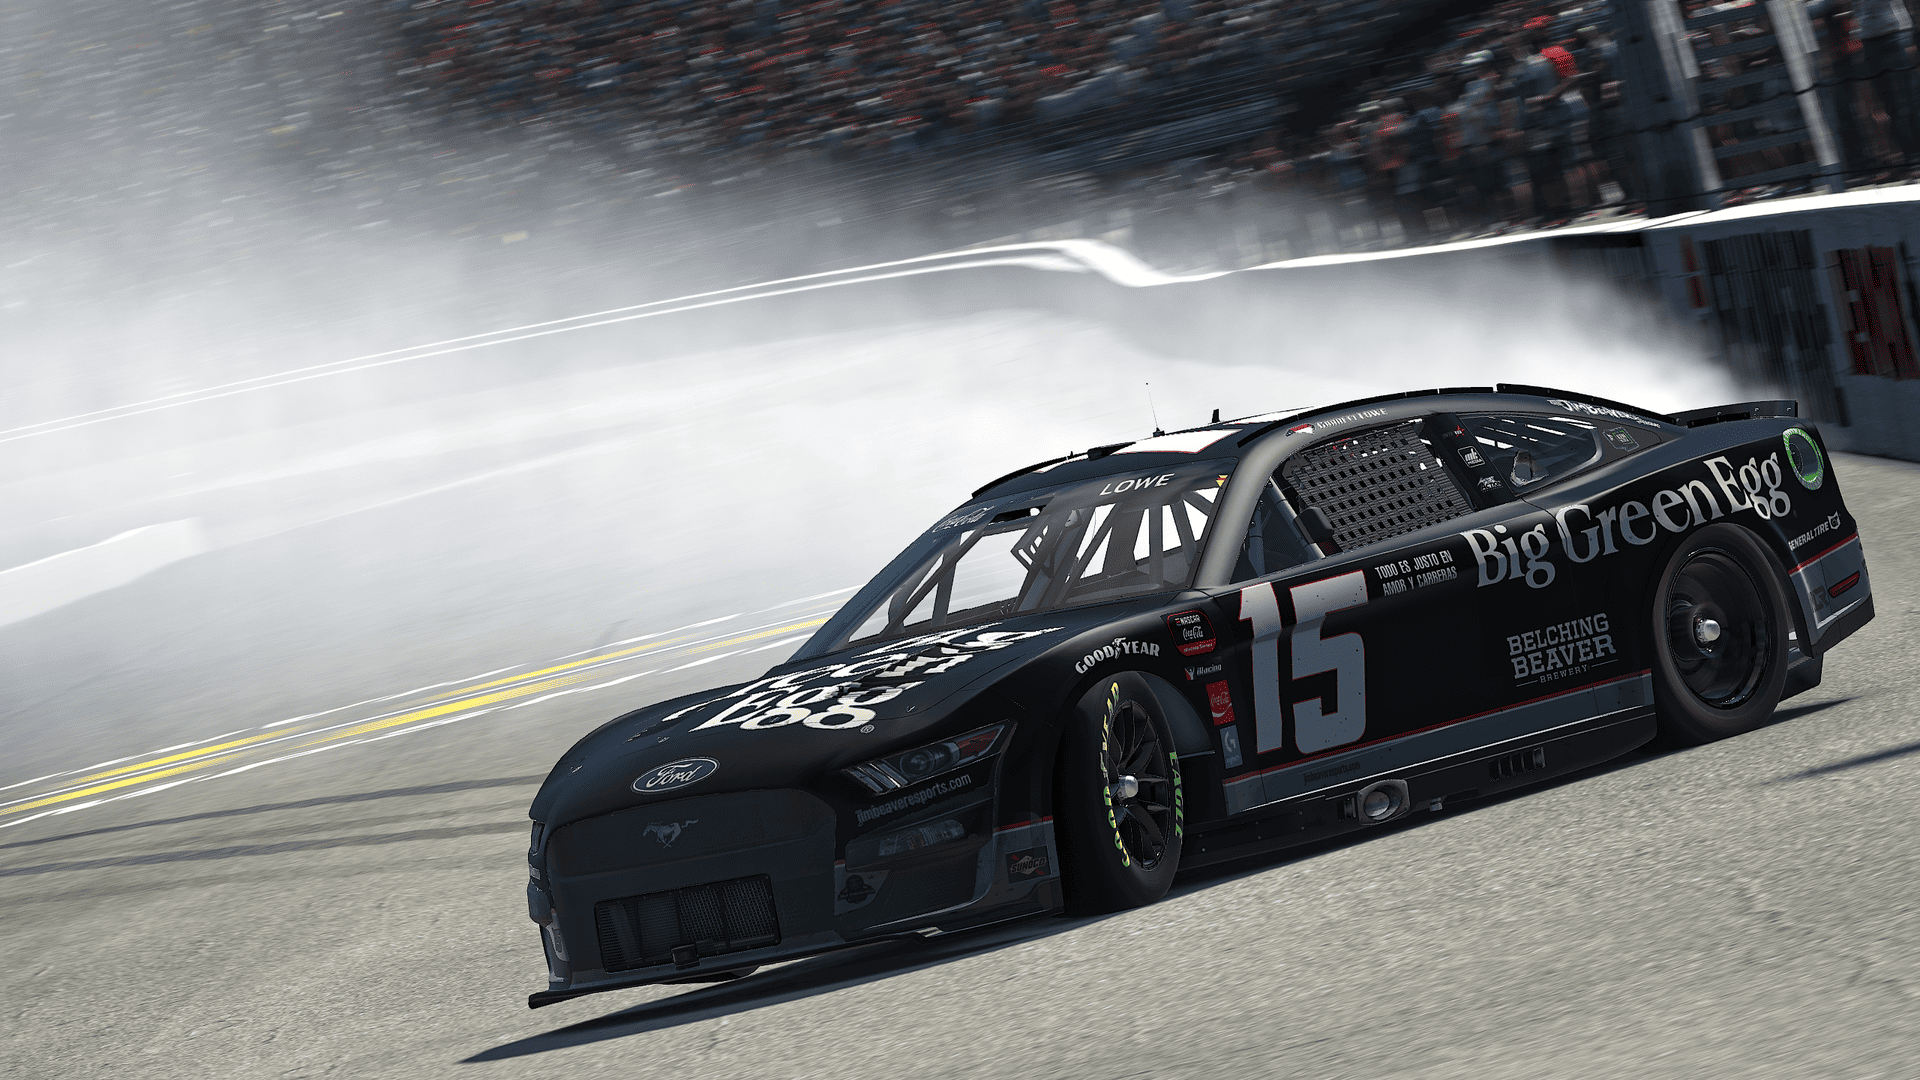 Garrett Lowe launched a successful protest paint scheme into victory lane in the eNASCAR Coca-Cola iRacing Series race at New Hampshire Motor Speedway.